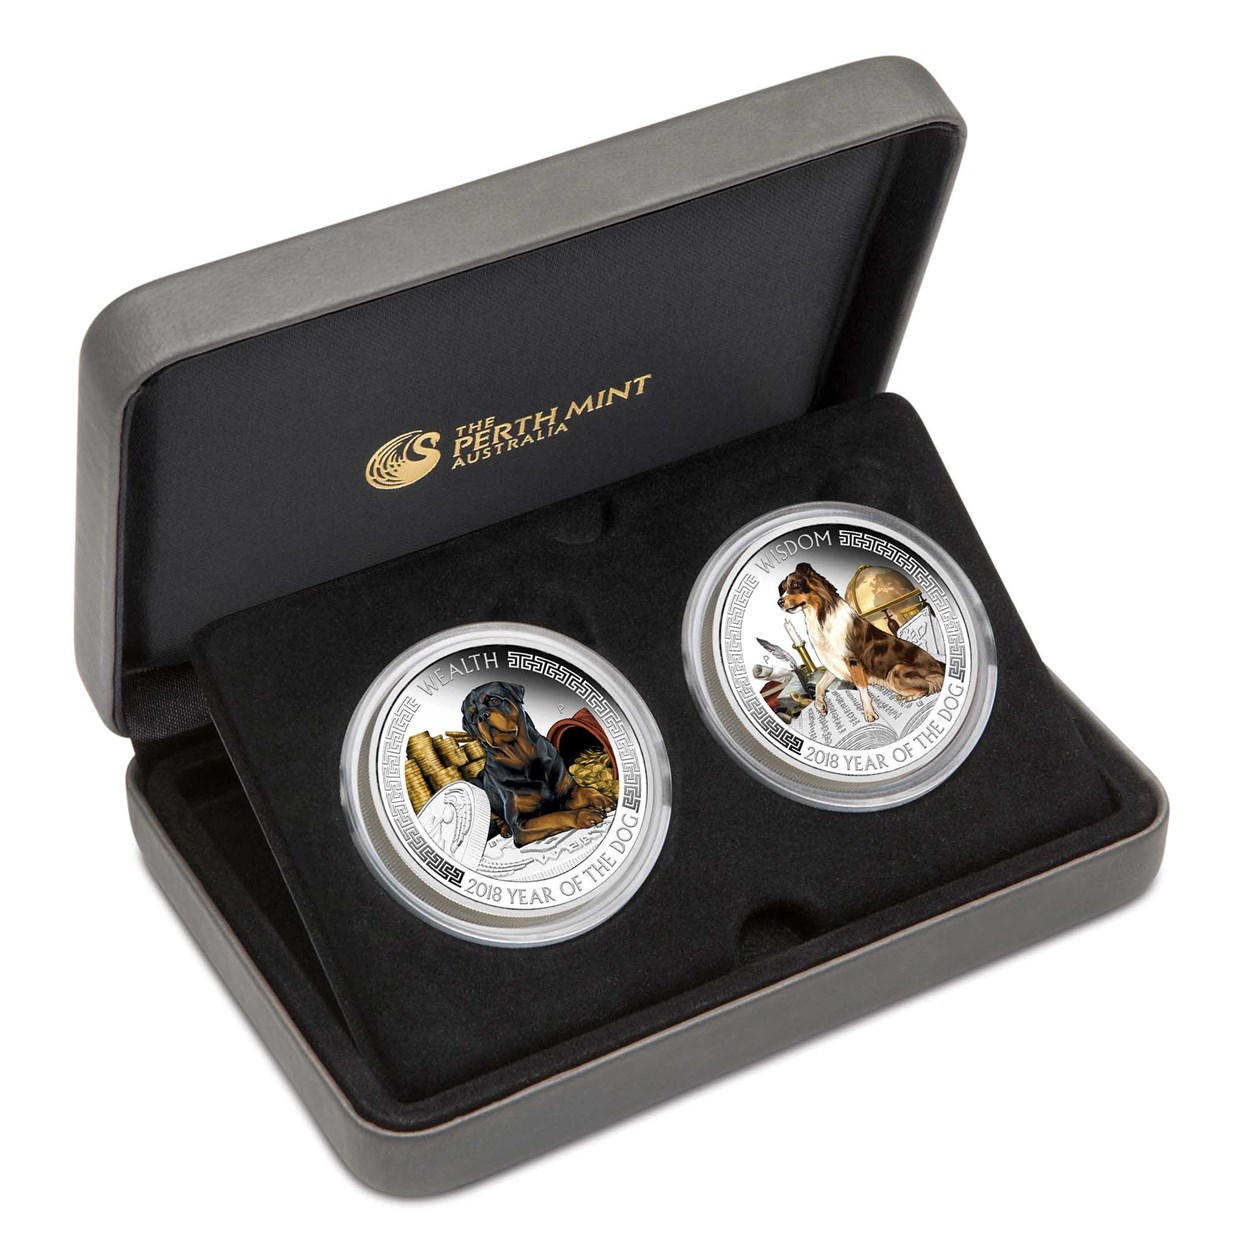 06 lunar good fortune series wealth and wisdom two coin set 2018 silver proof InCase